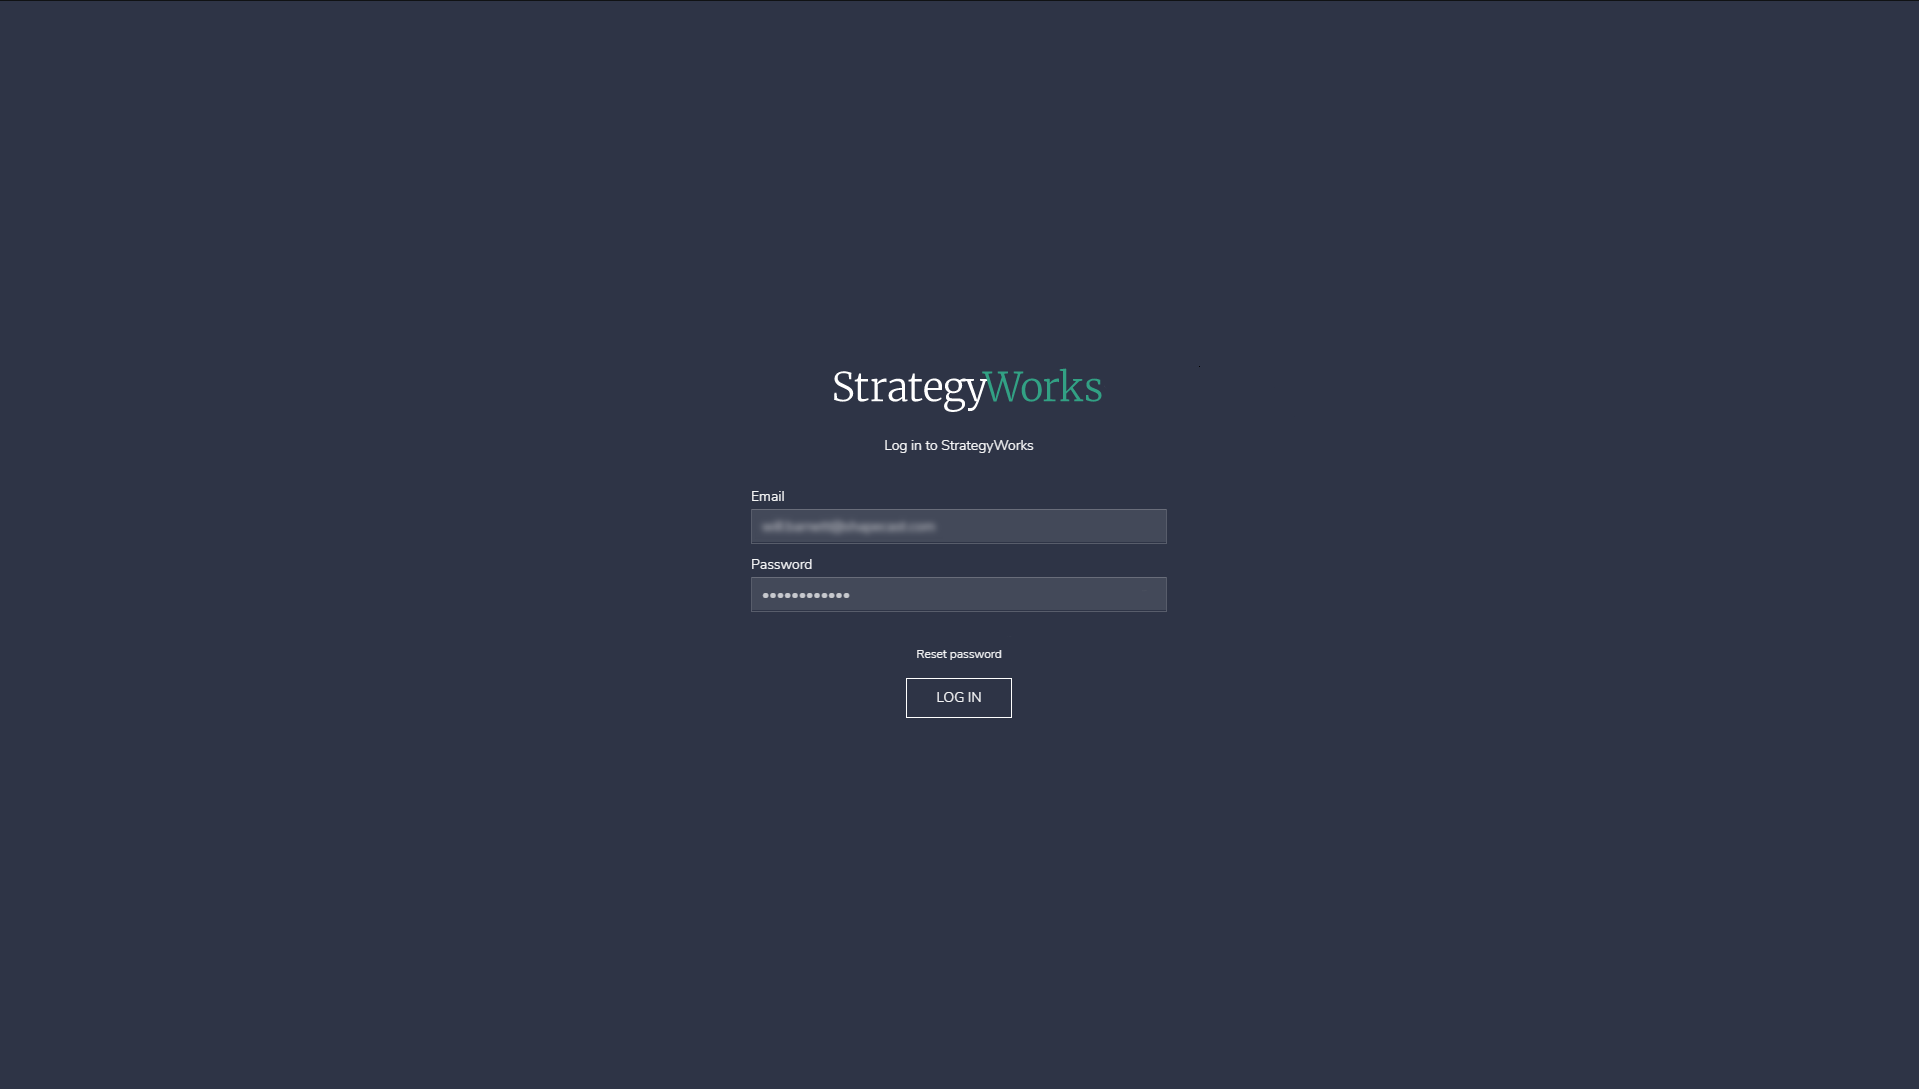 Log in to StrategyWorks